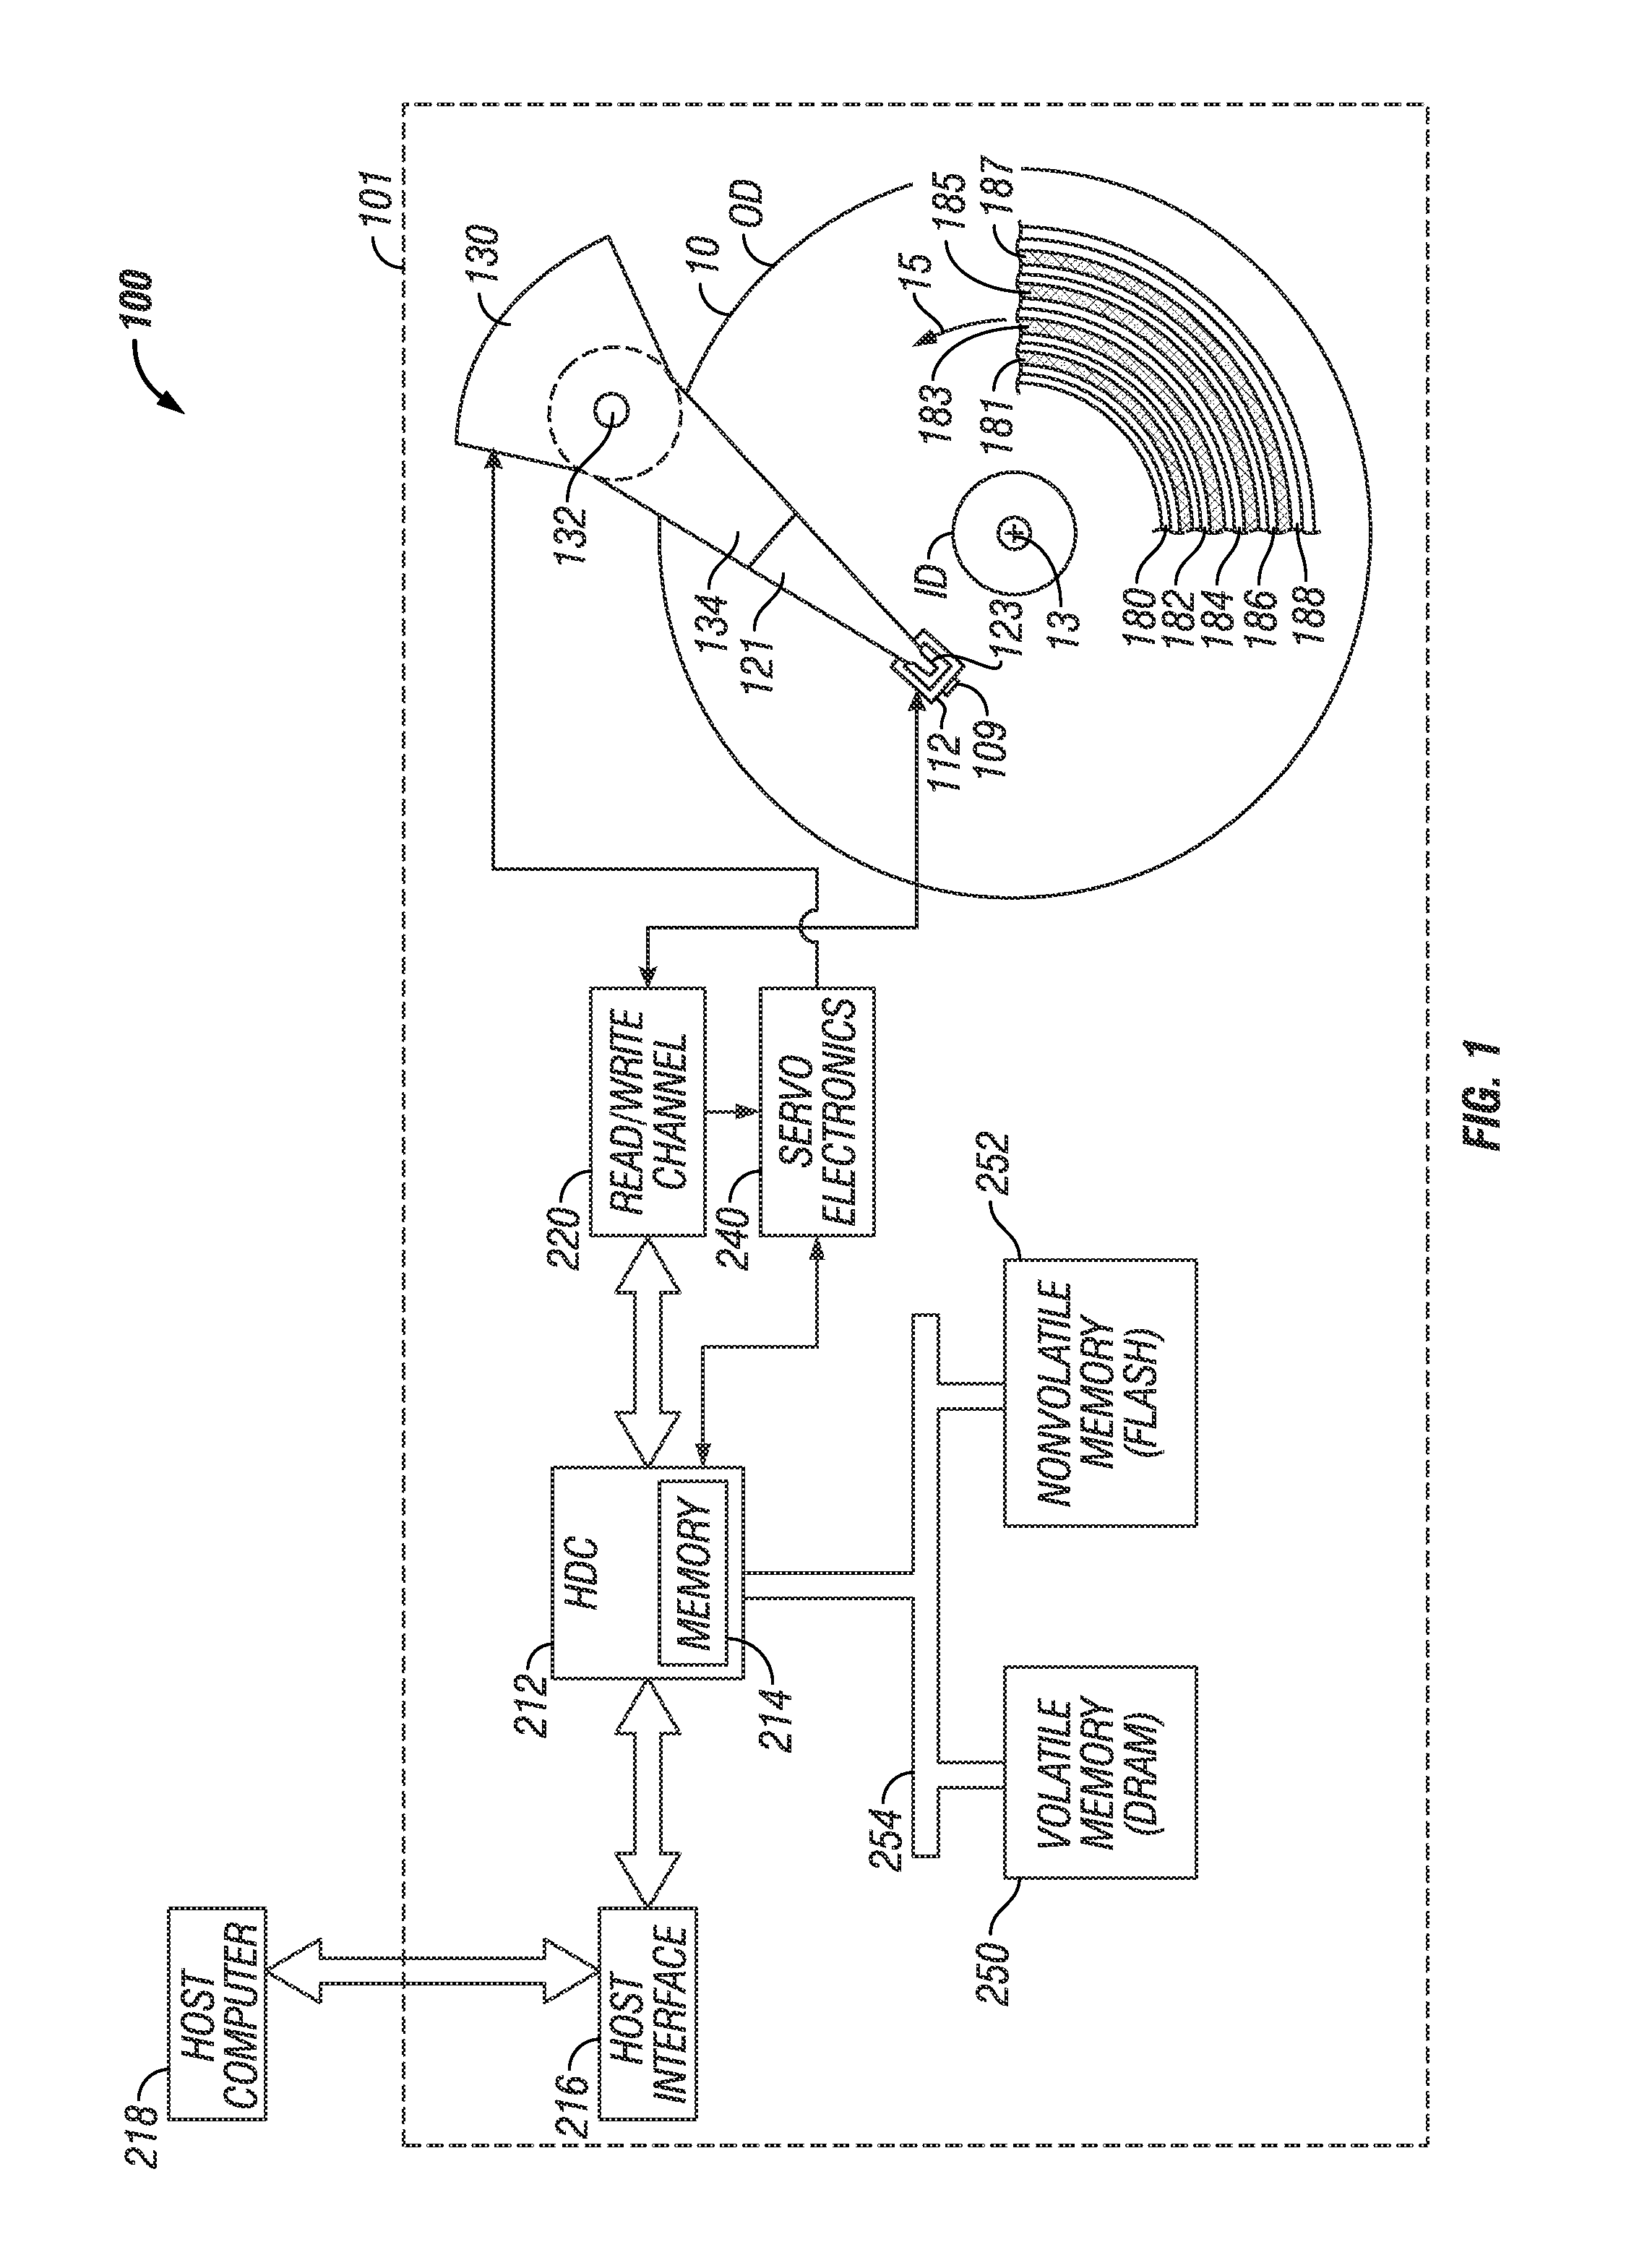 Shingled magnetic recording (SMR) disk drive with verification of written data